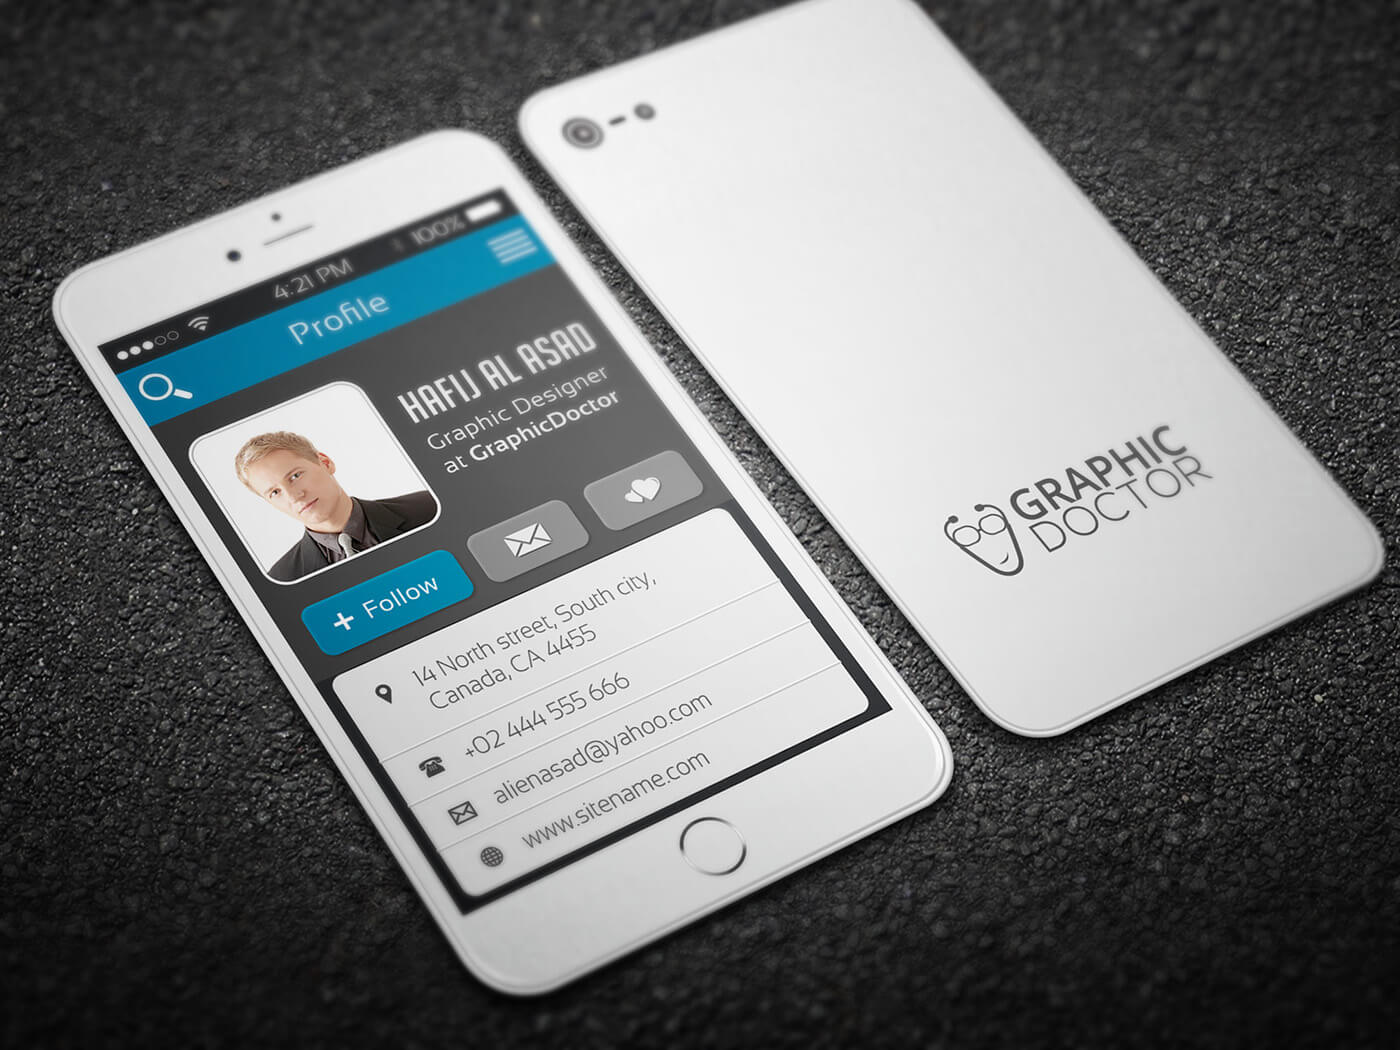 Iphone Business Card Template On Behance Pertaining To Iphone Business Card Template